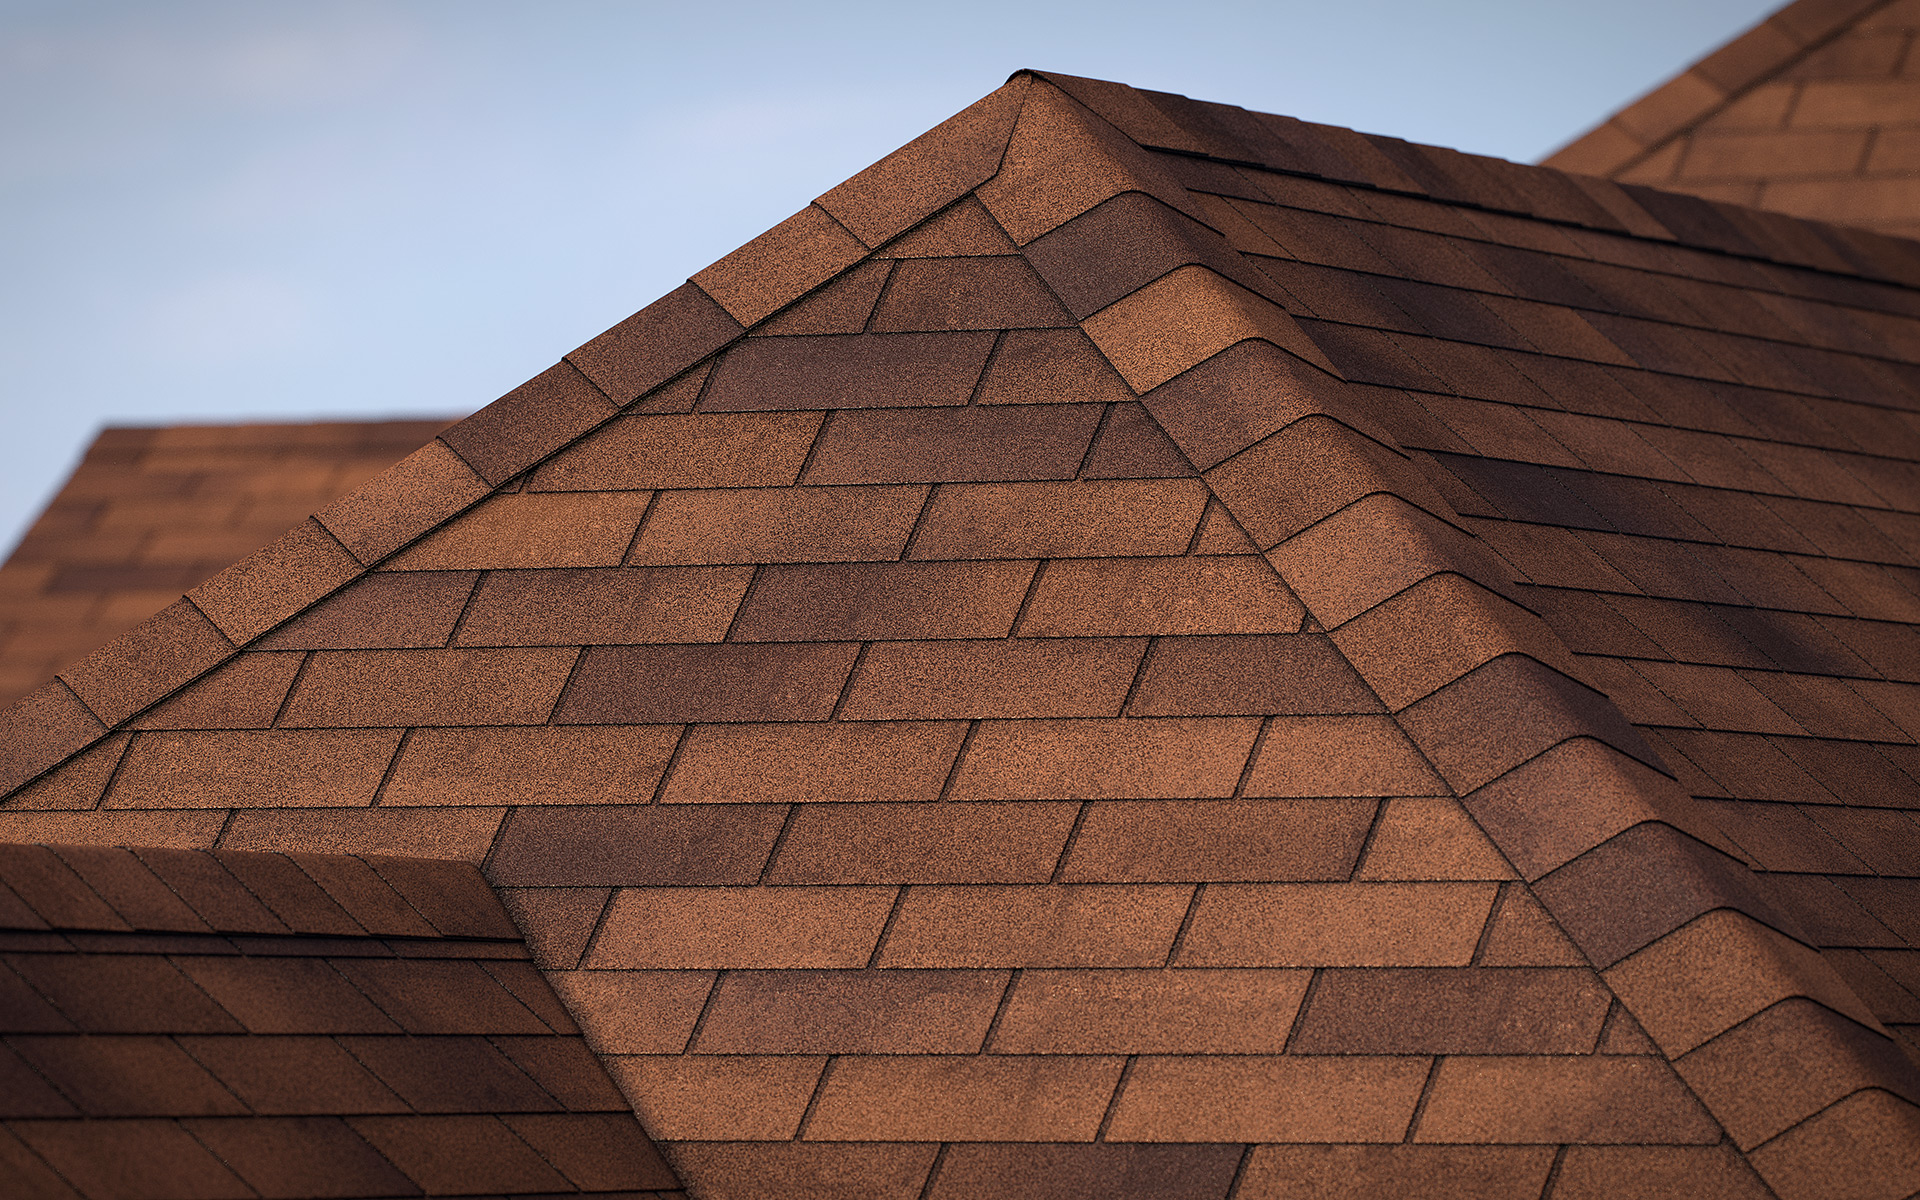 3-tab asphalt roof shingles brown2 color 3D model preset for 3dsmax and RailClone. Rendered with vray, made for arch-viz.